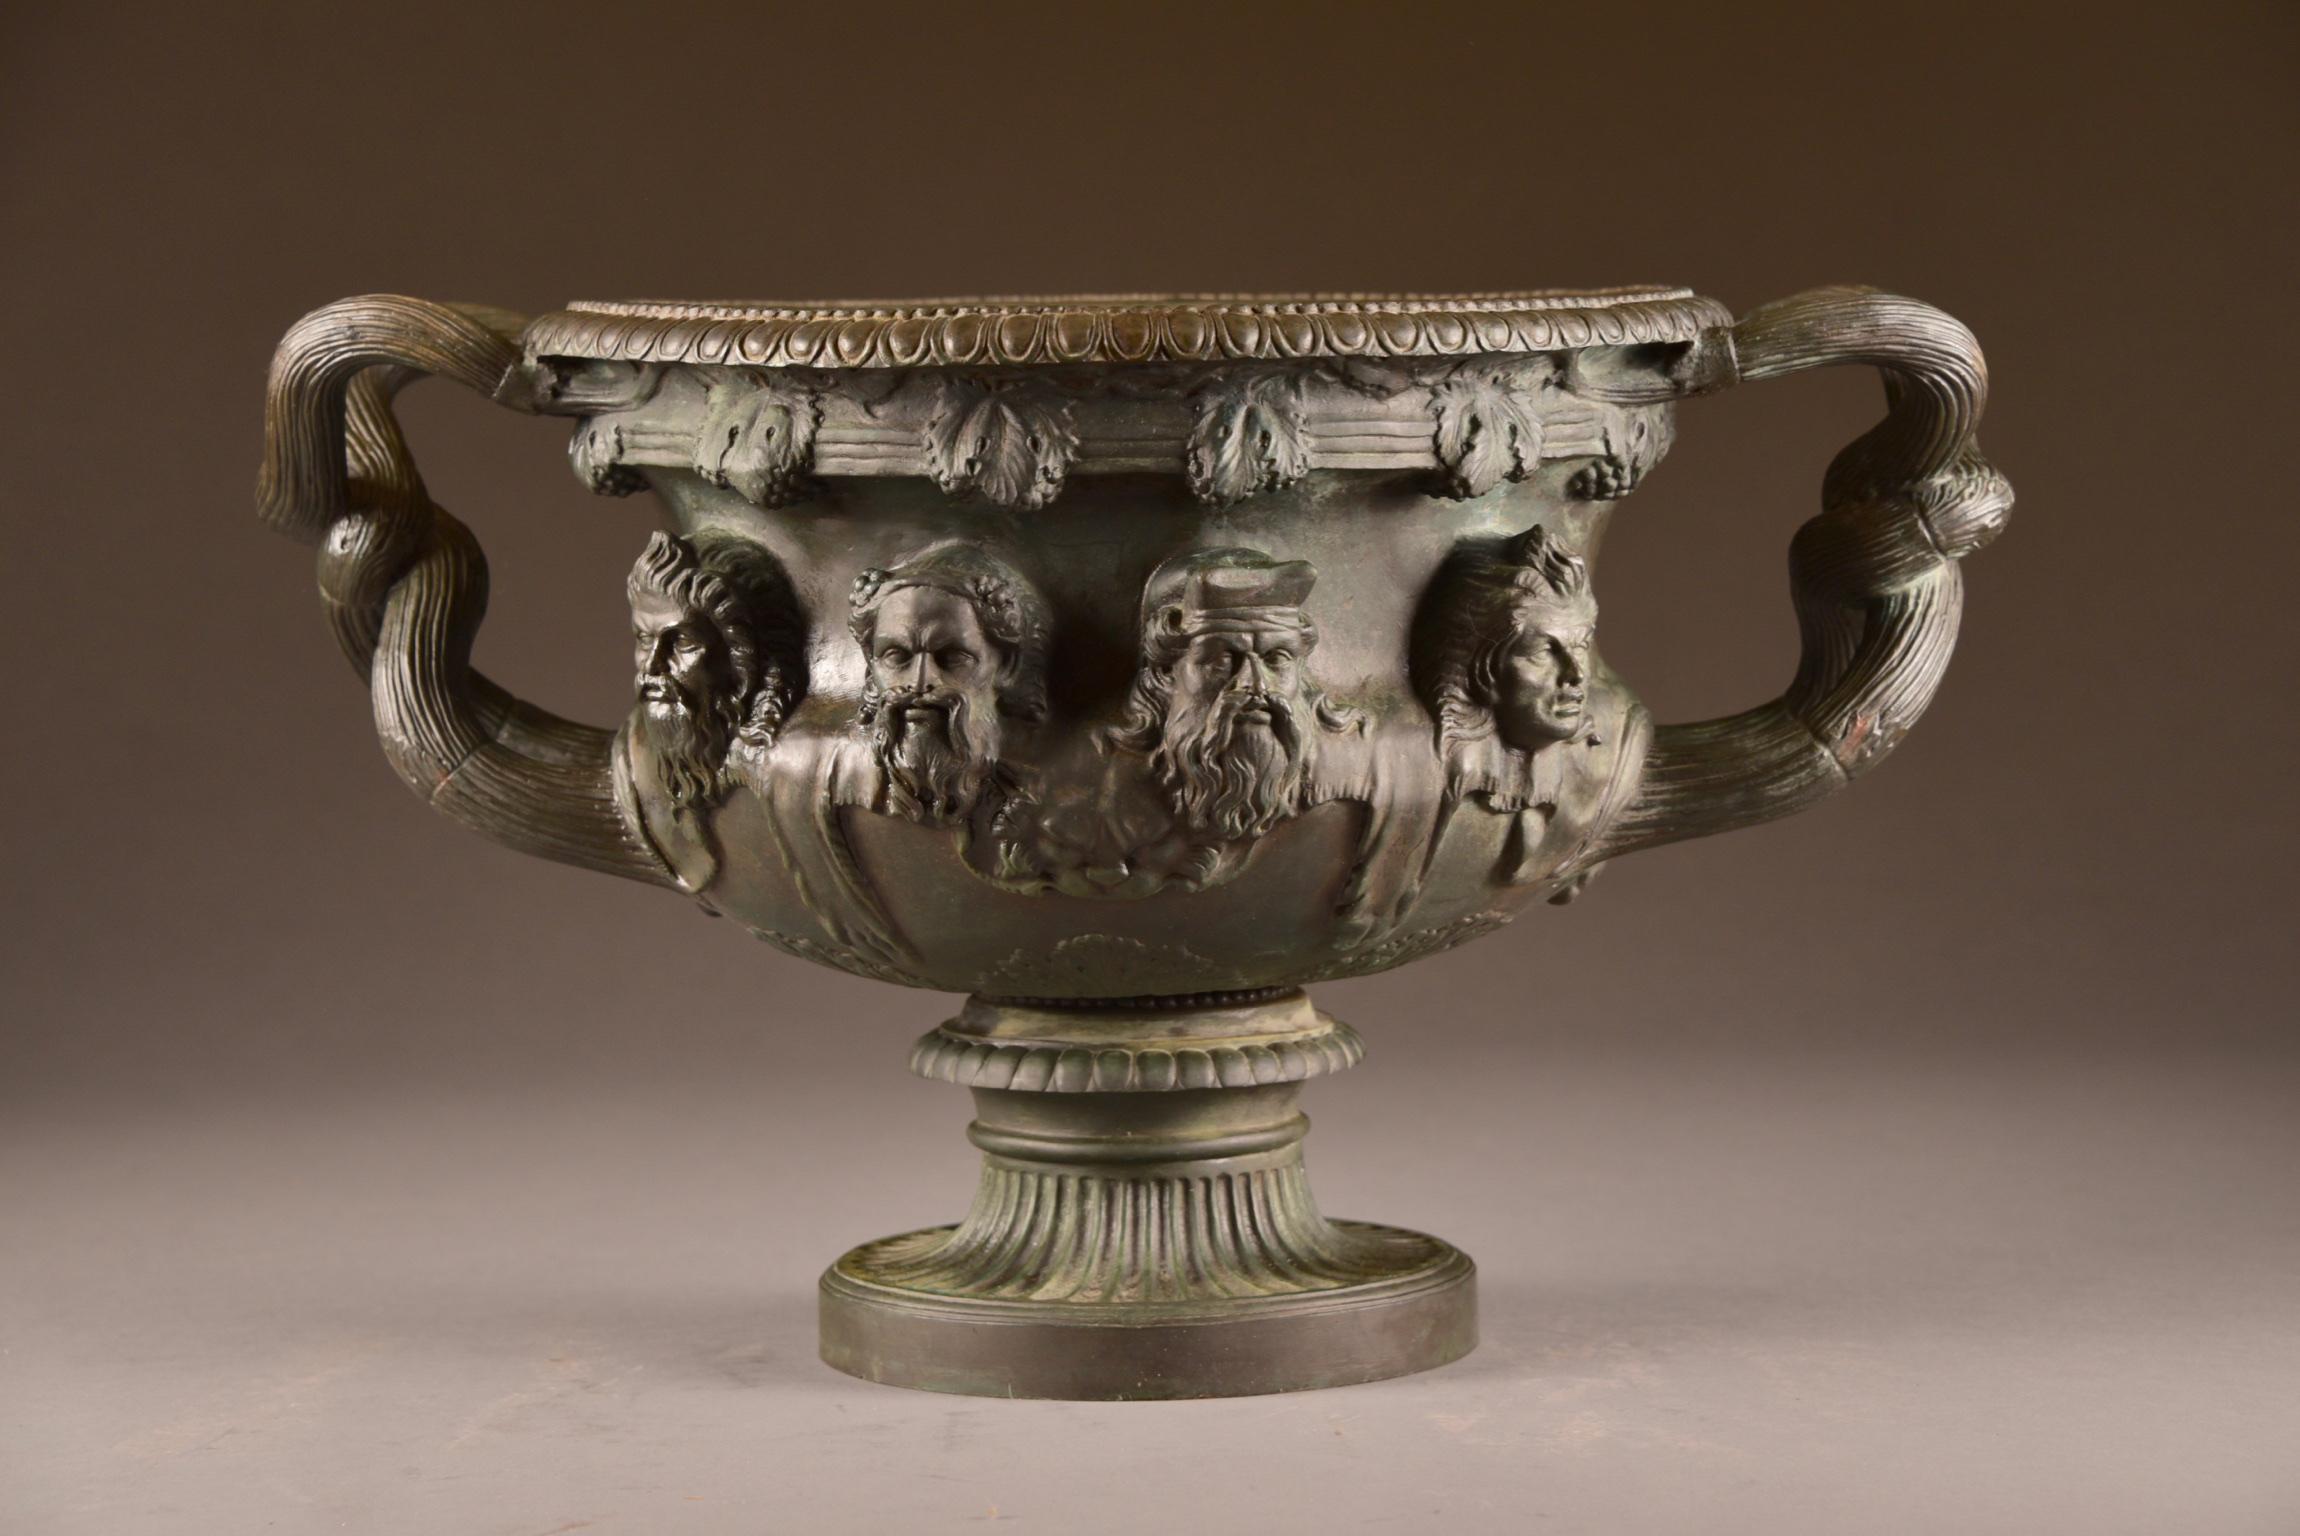 Rare large and heavy bronze Warwick vase with Bacchic ornaments, in good condition.

The Warwick vase is an ancient Roman marble vase with Bacchic ornament that was discovered at Hadrian's Villa, Tivoli about 1771 by Gavin Hamilton, a Scottish